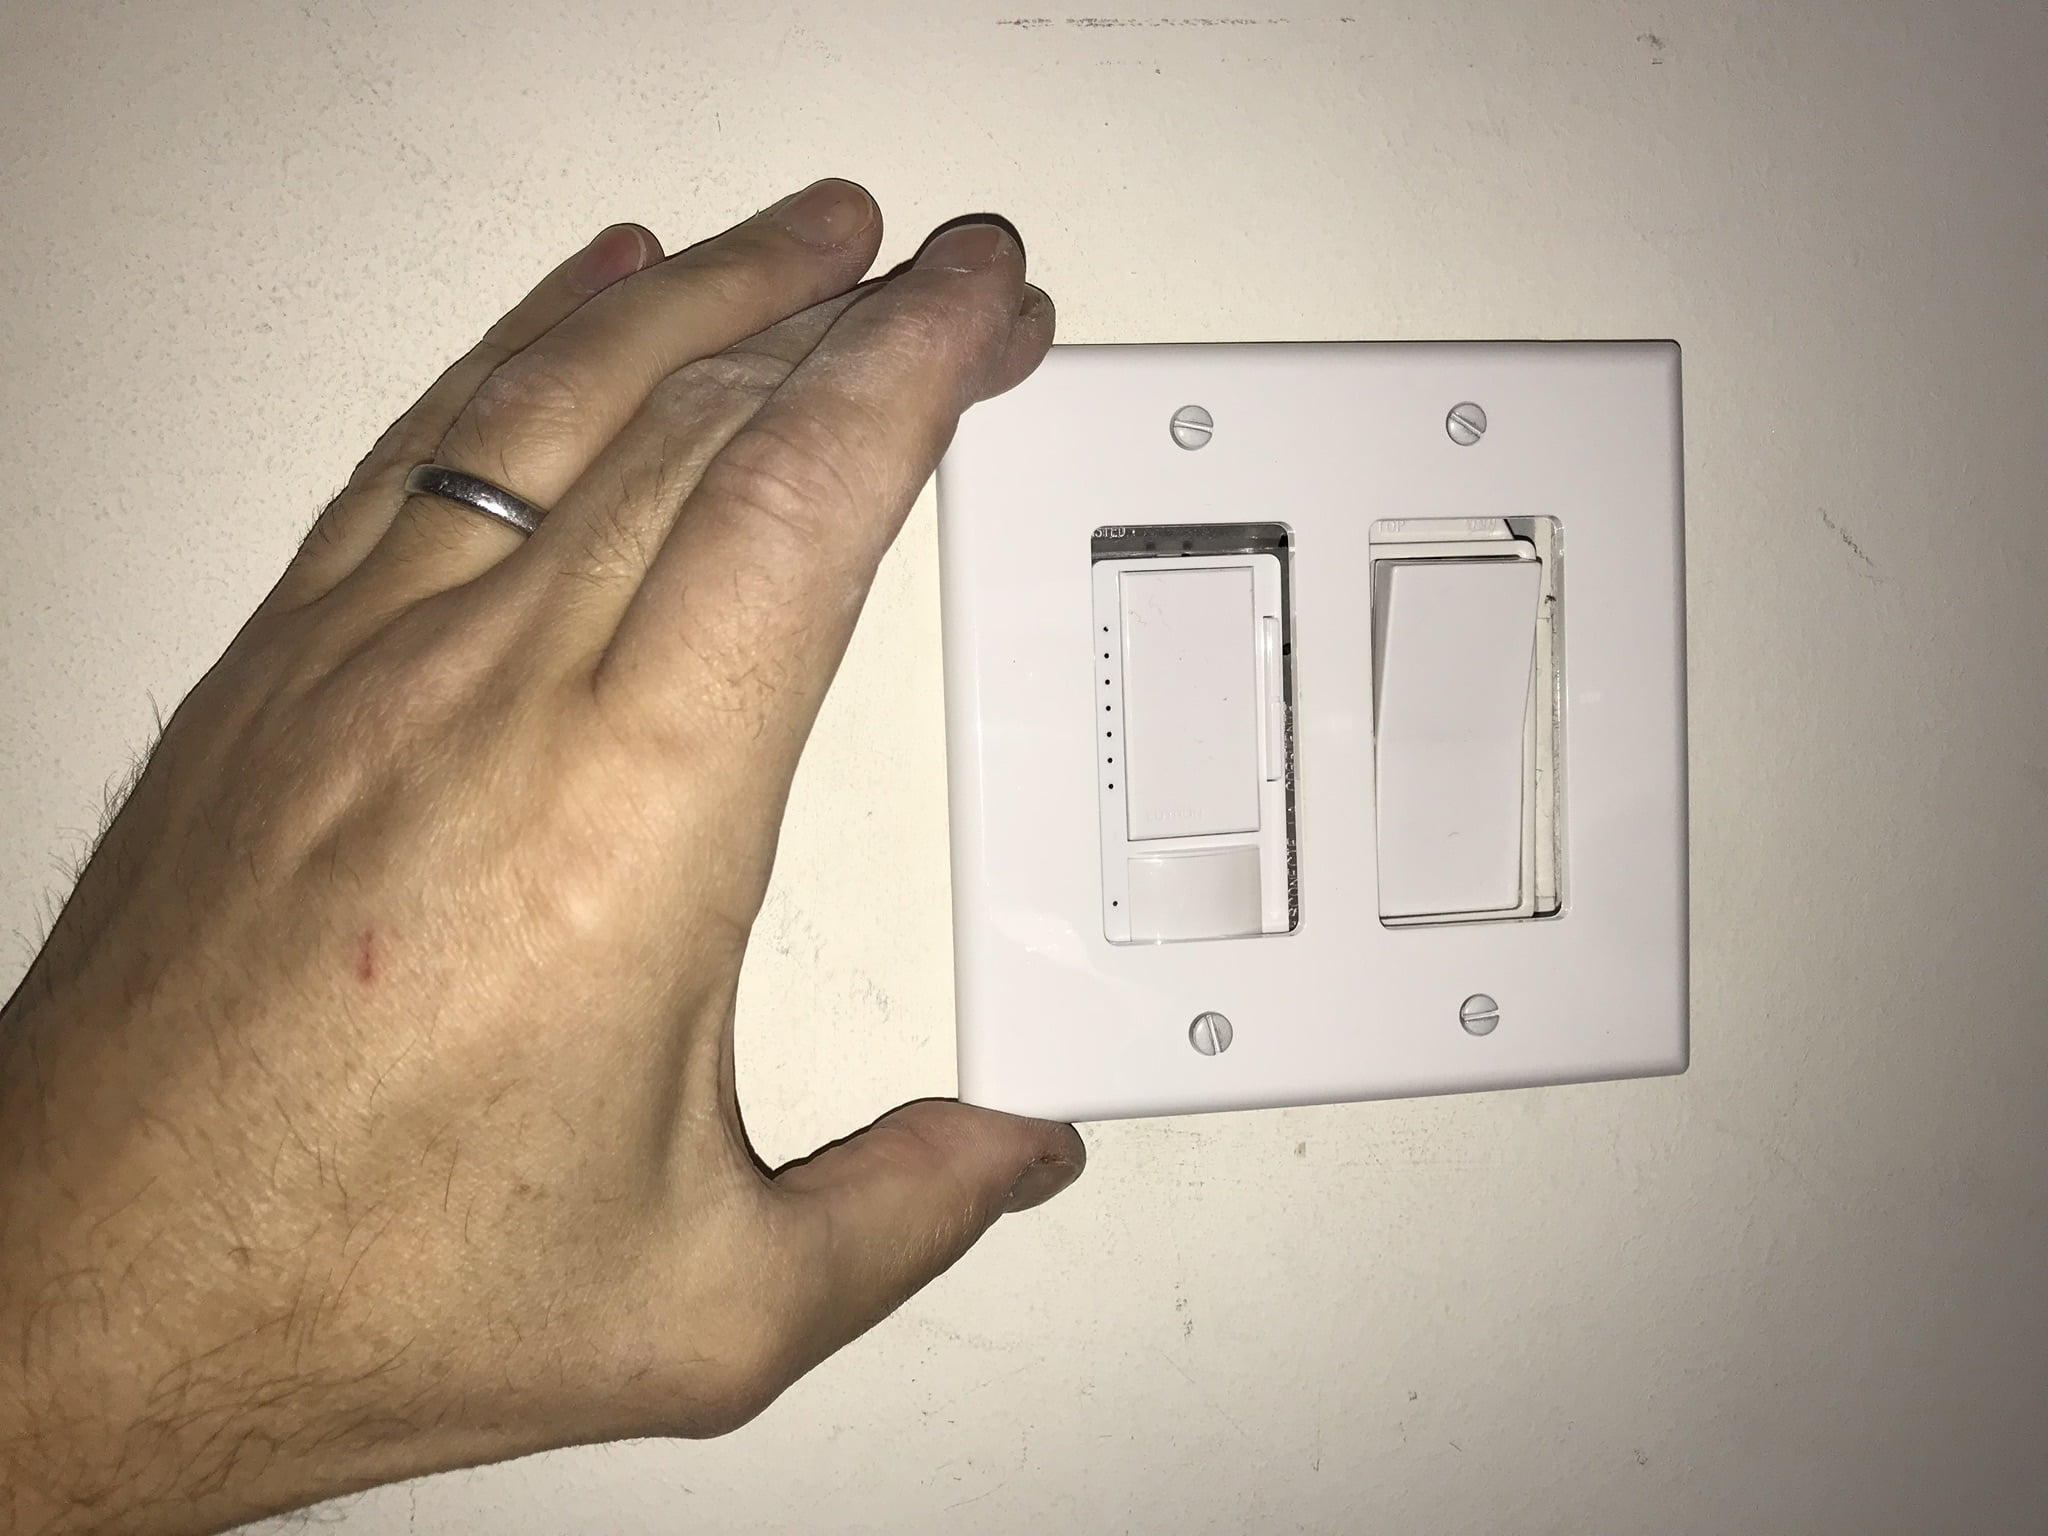 What Happens If You Don’t Ground A Motion Detector Switch?